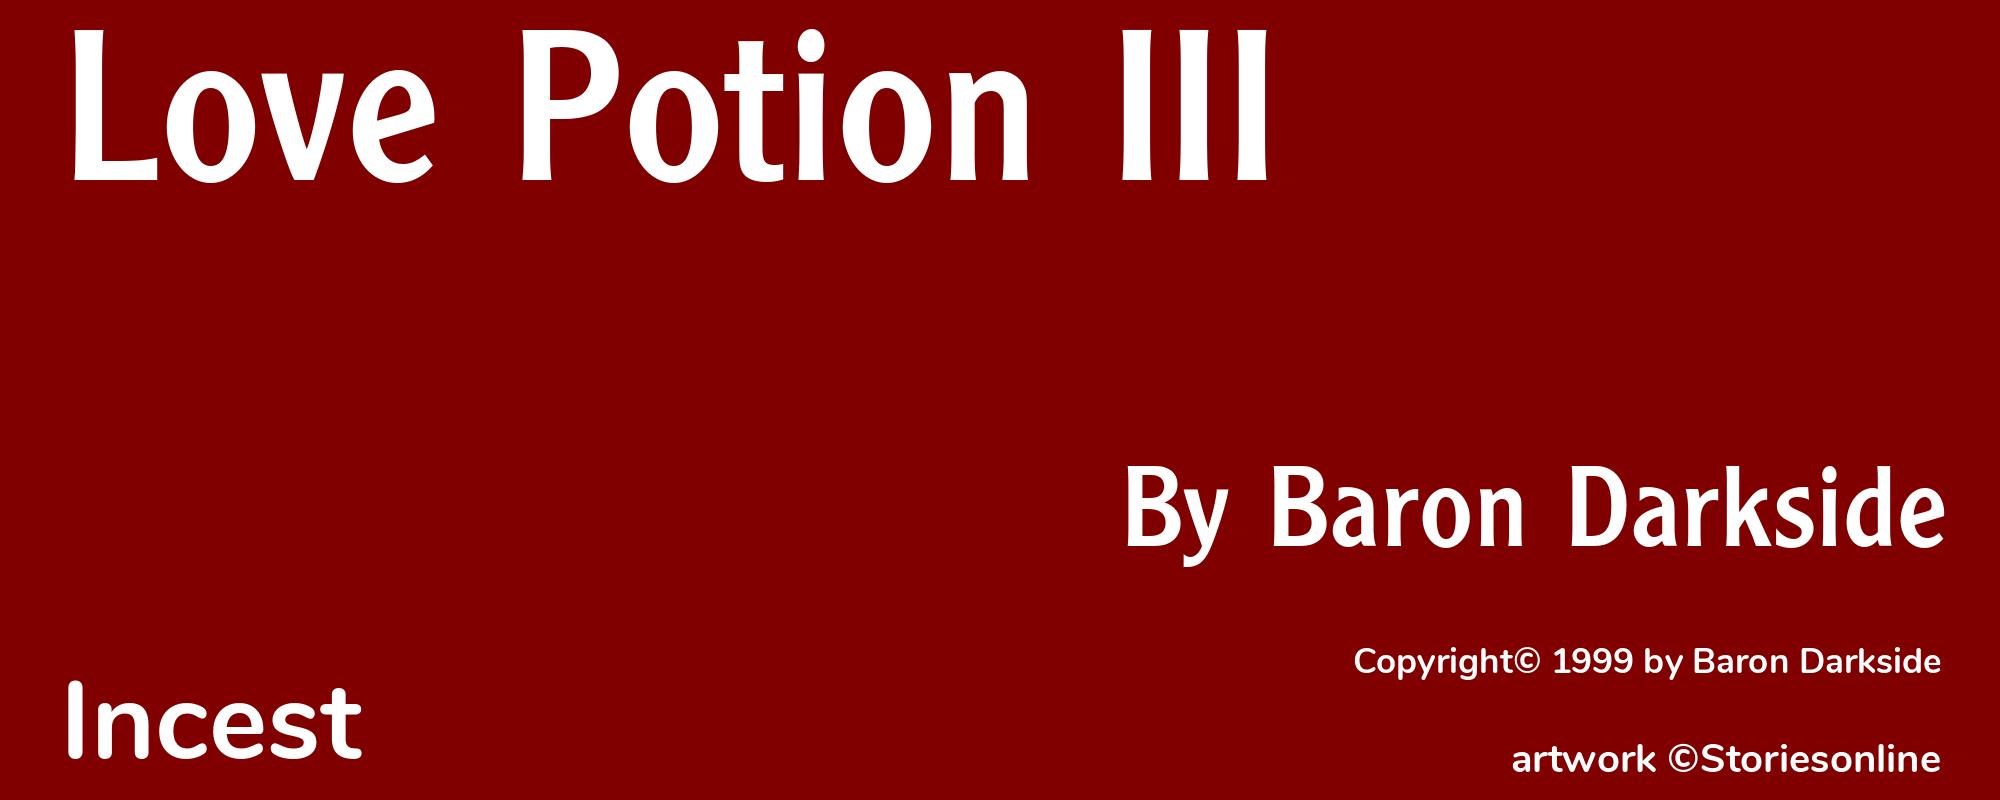 Love Potion III - Cover